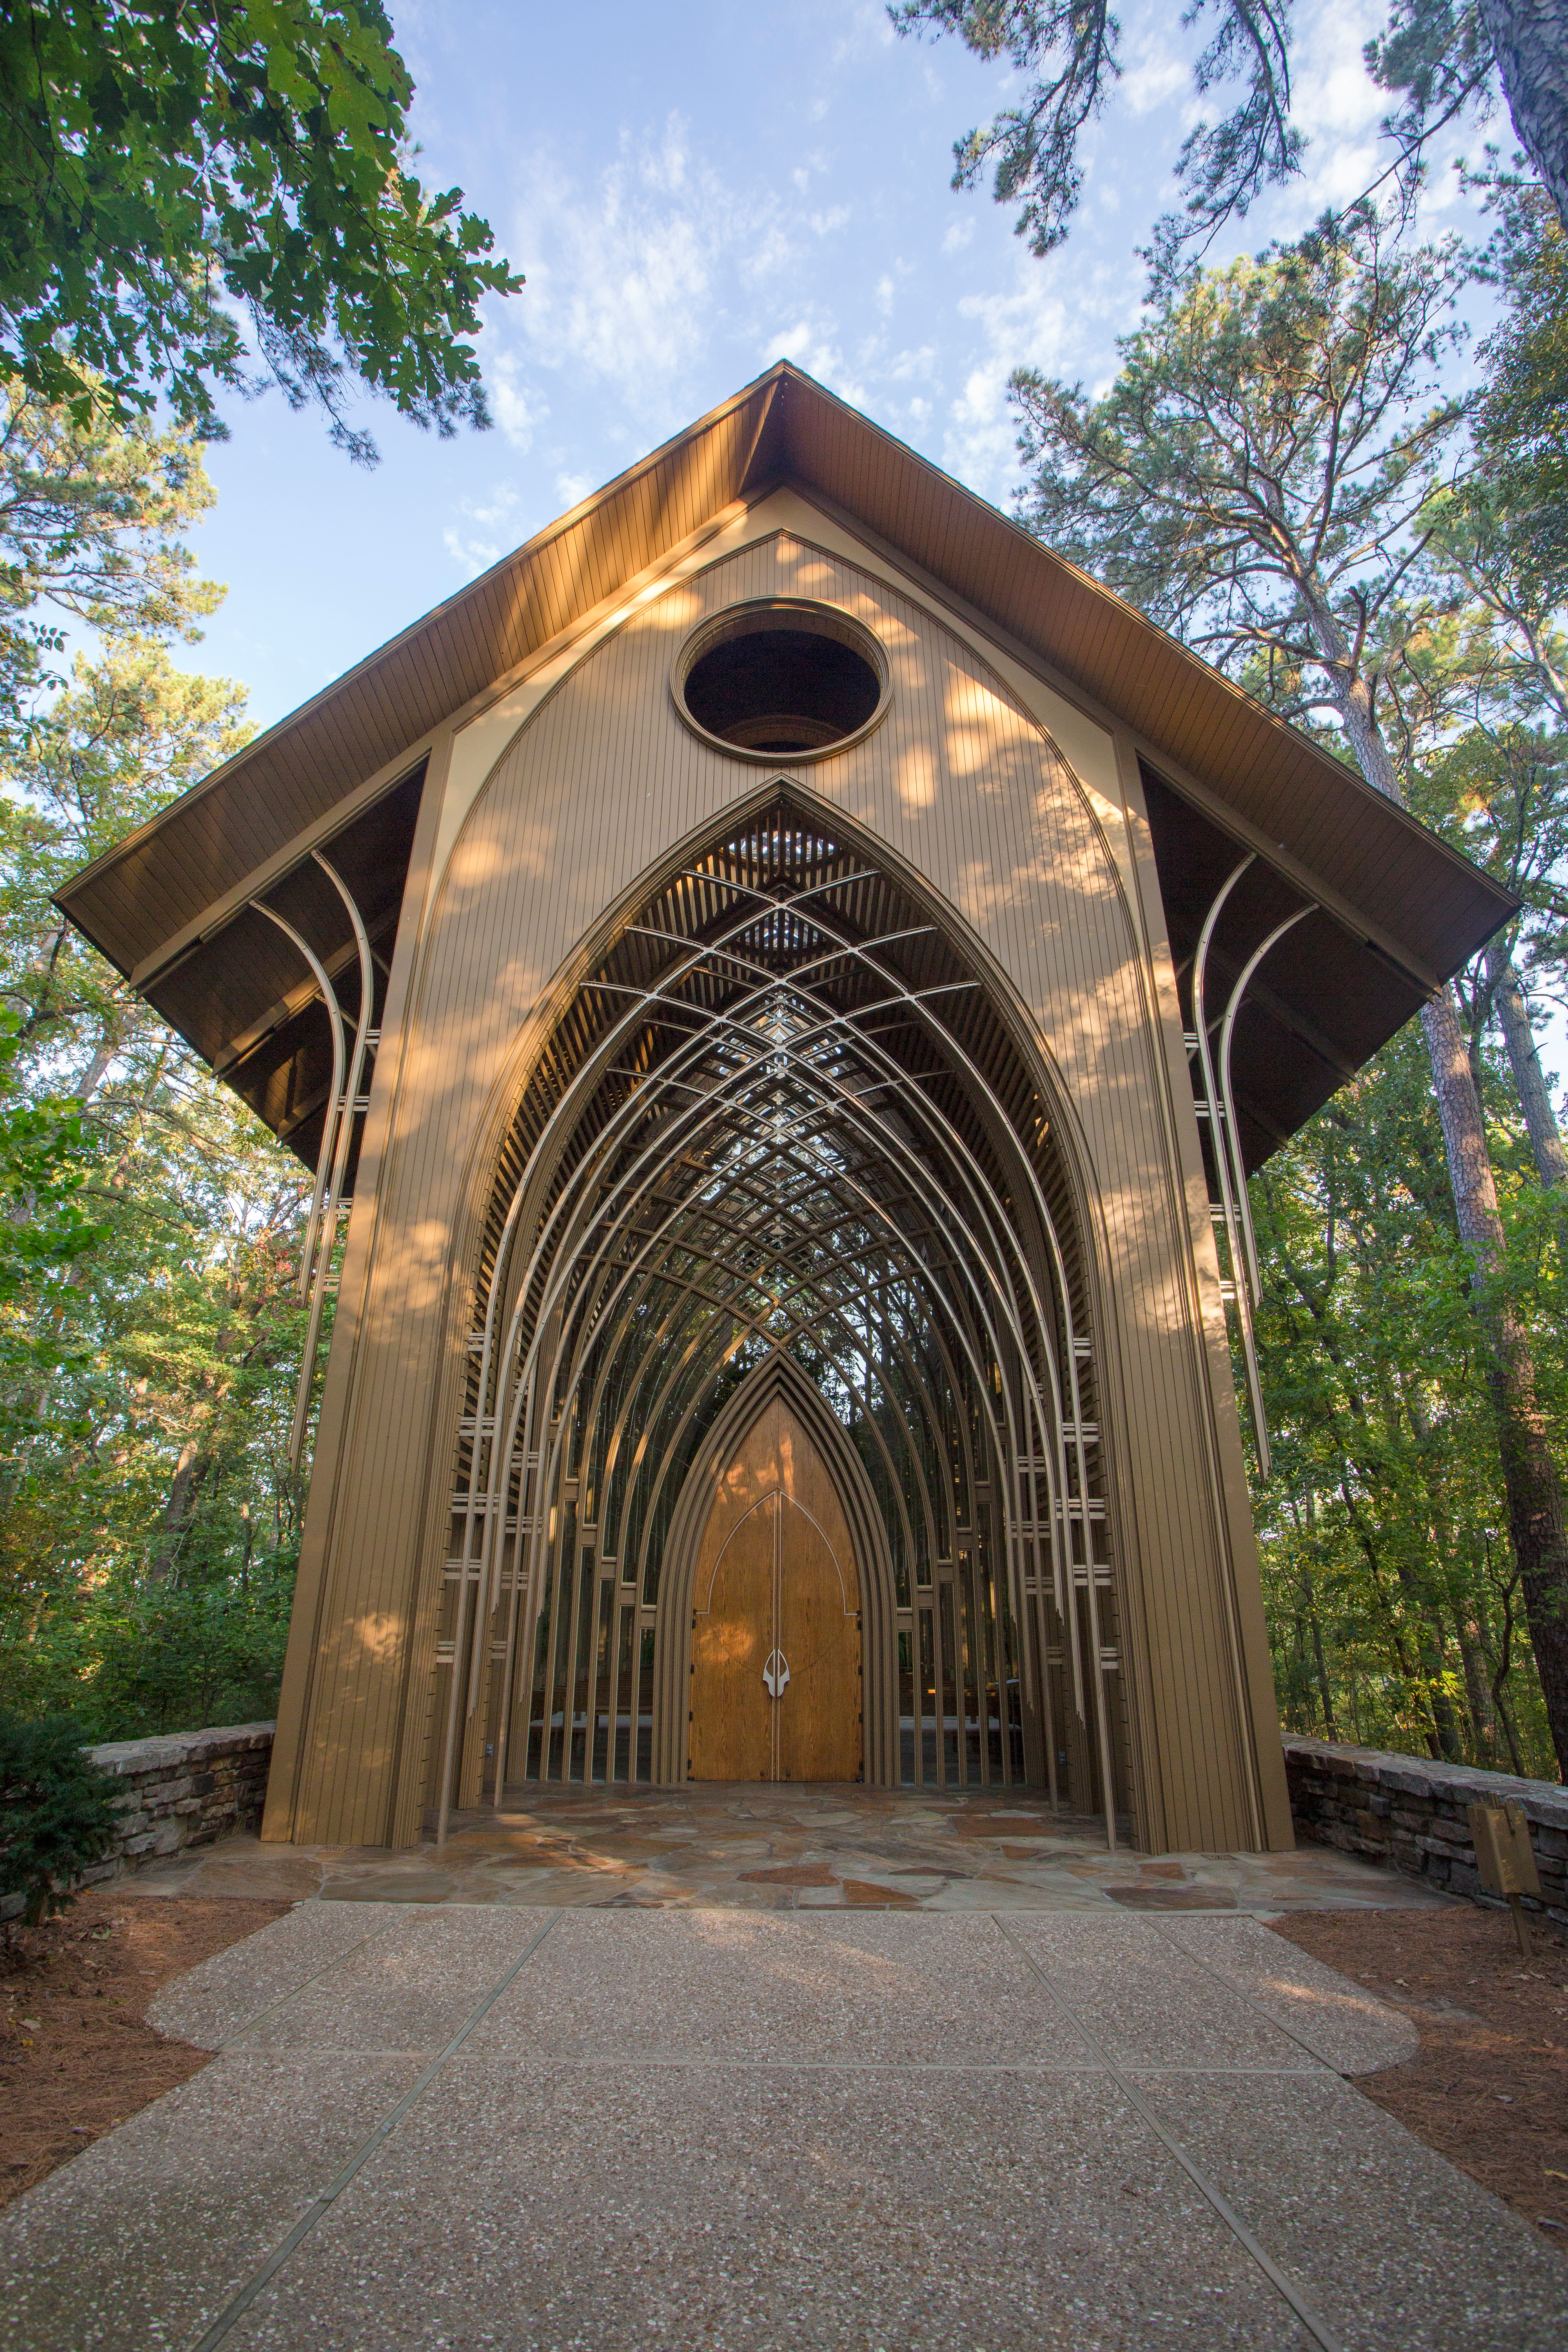 The Mildred B. Cooper Memorial Chapel on Wednesday, Oct. 1, 2014, in Bella Vista, Ark. The chapel was designed by E. Fay Jones and constructed in 1988.